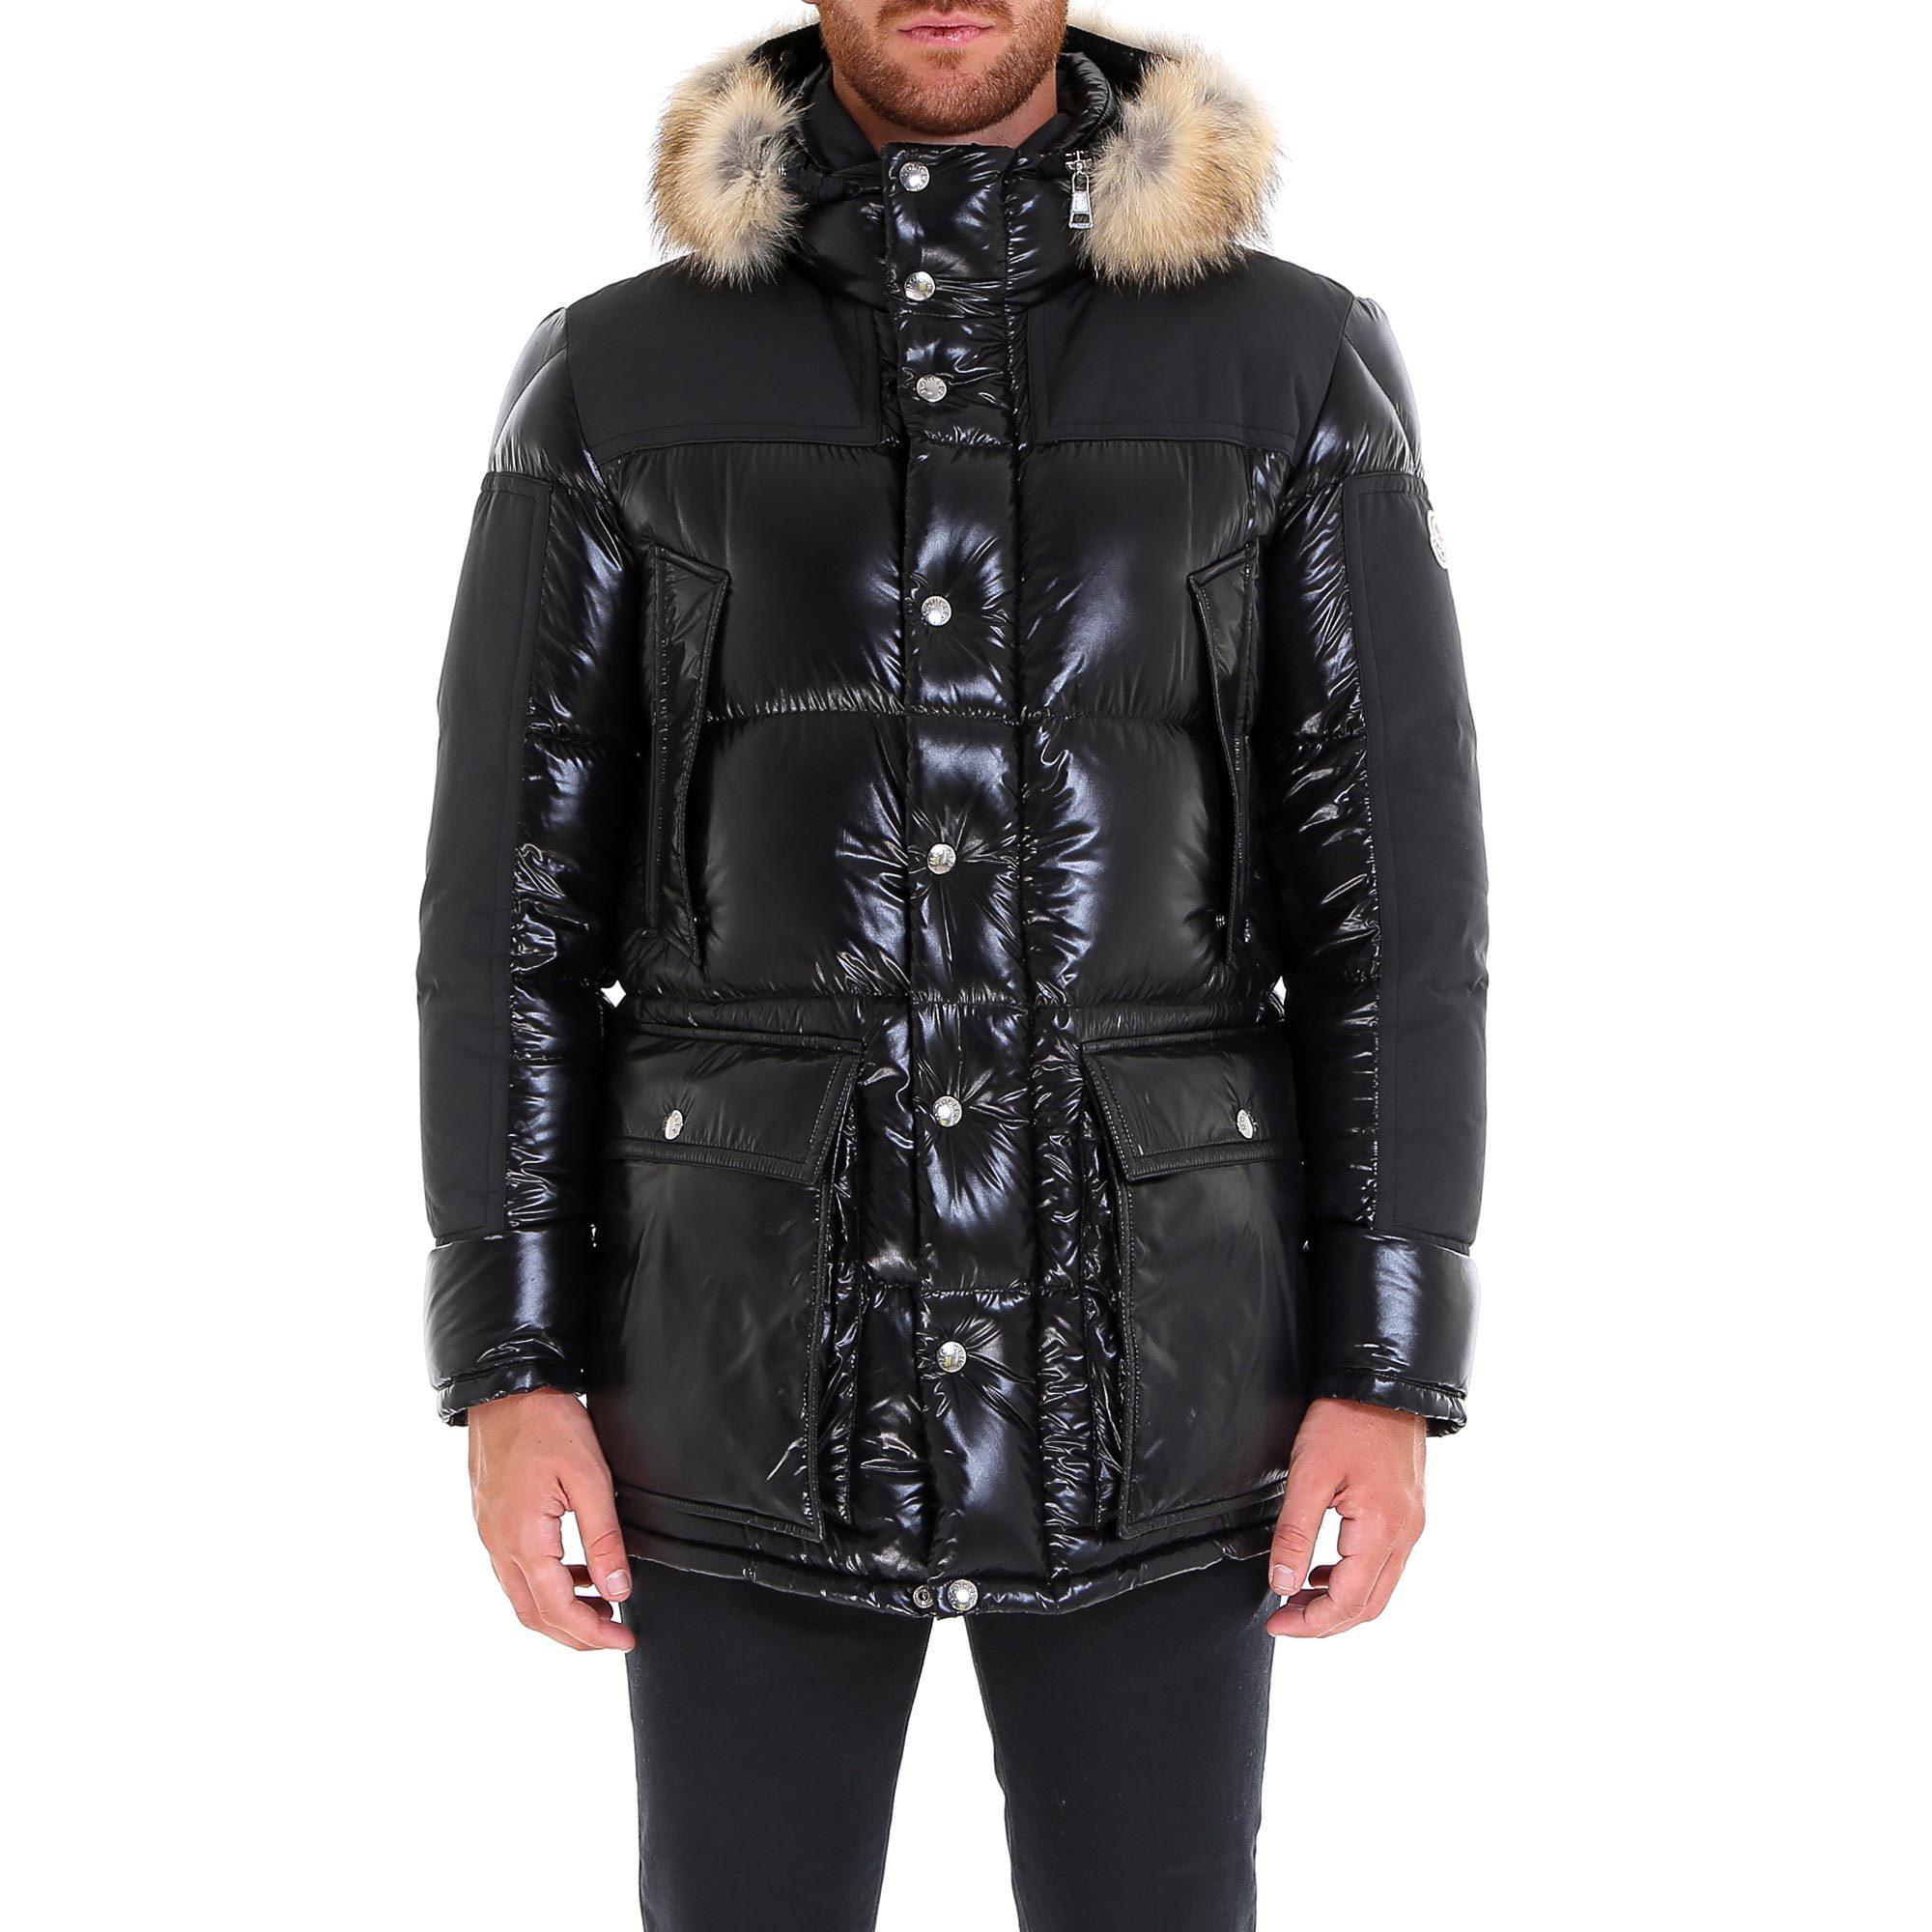 Moncler Synthetic Frey Padded Jacket in Black for Men - Save 25% - Lyst